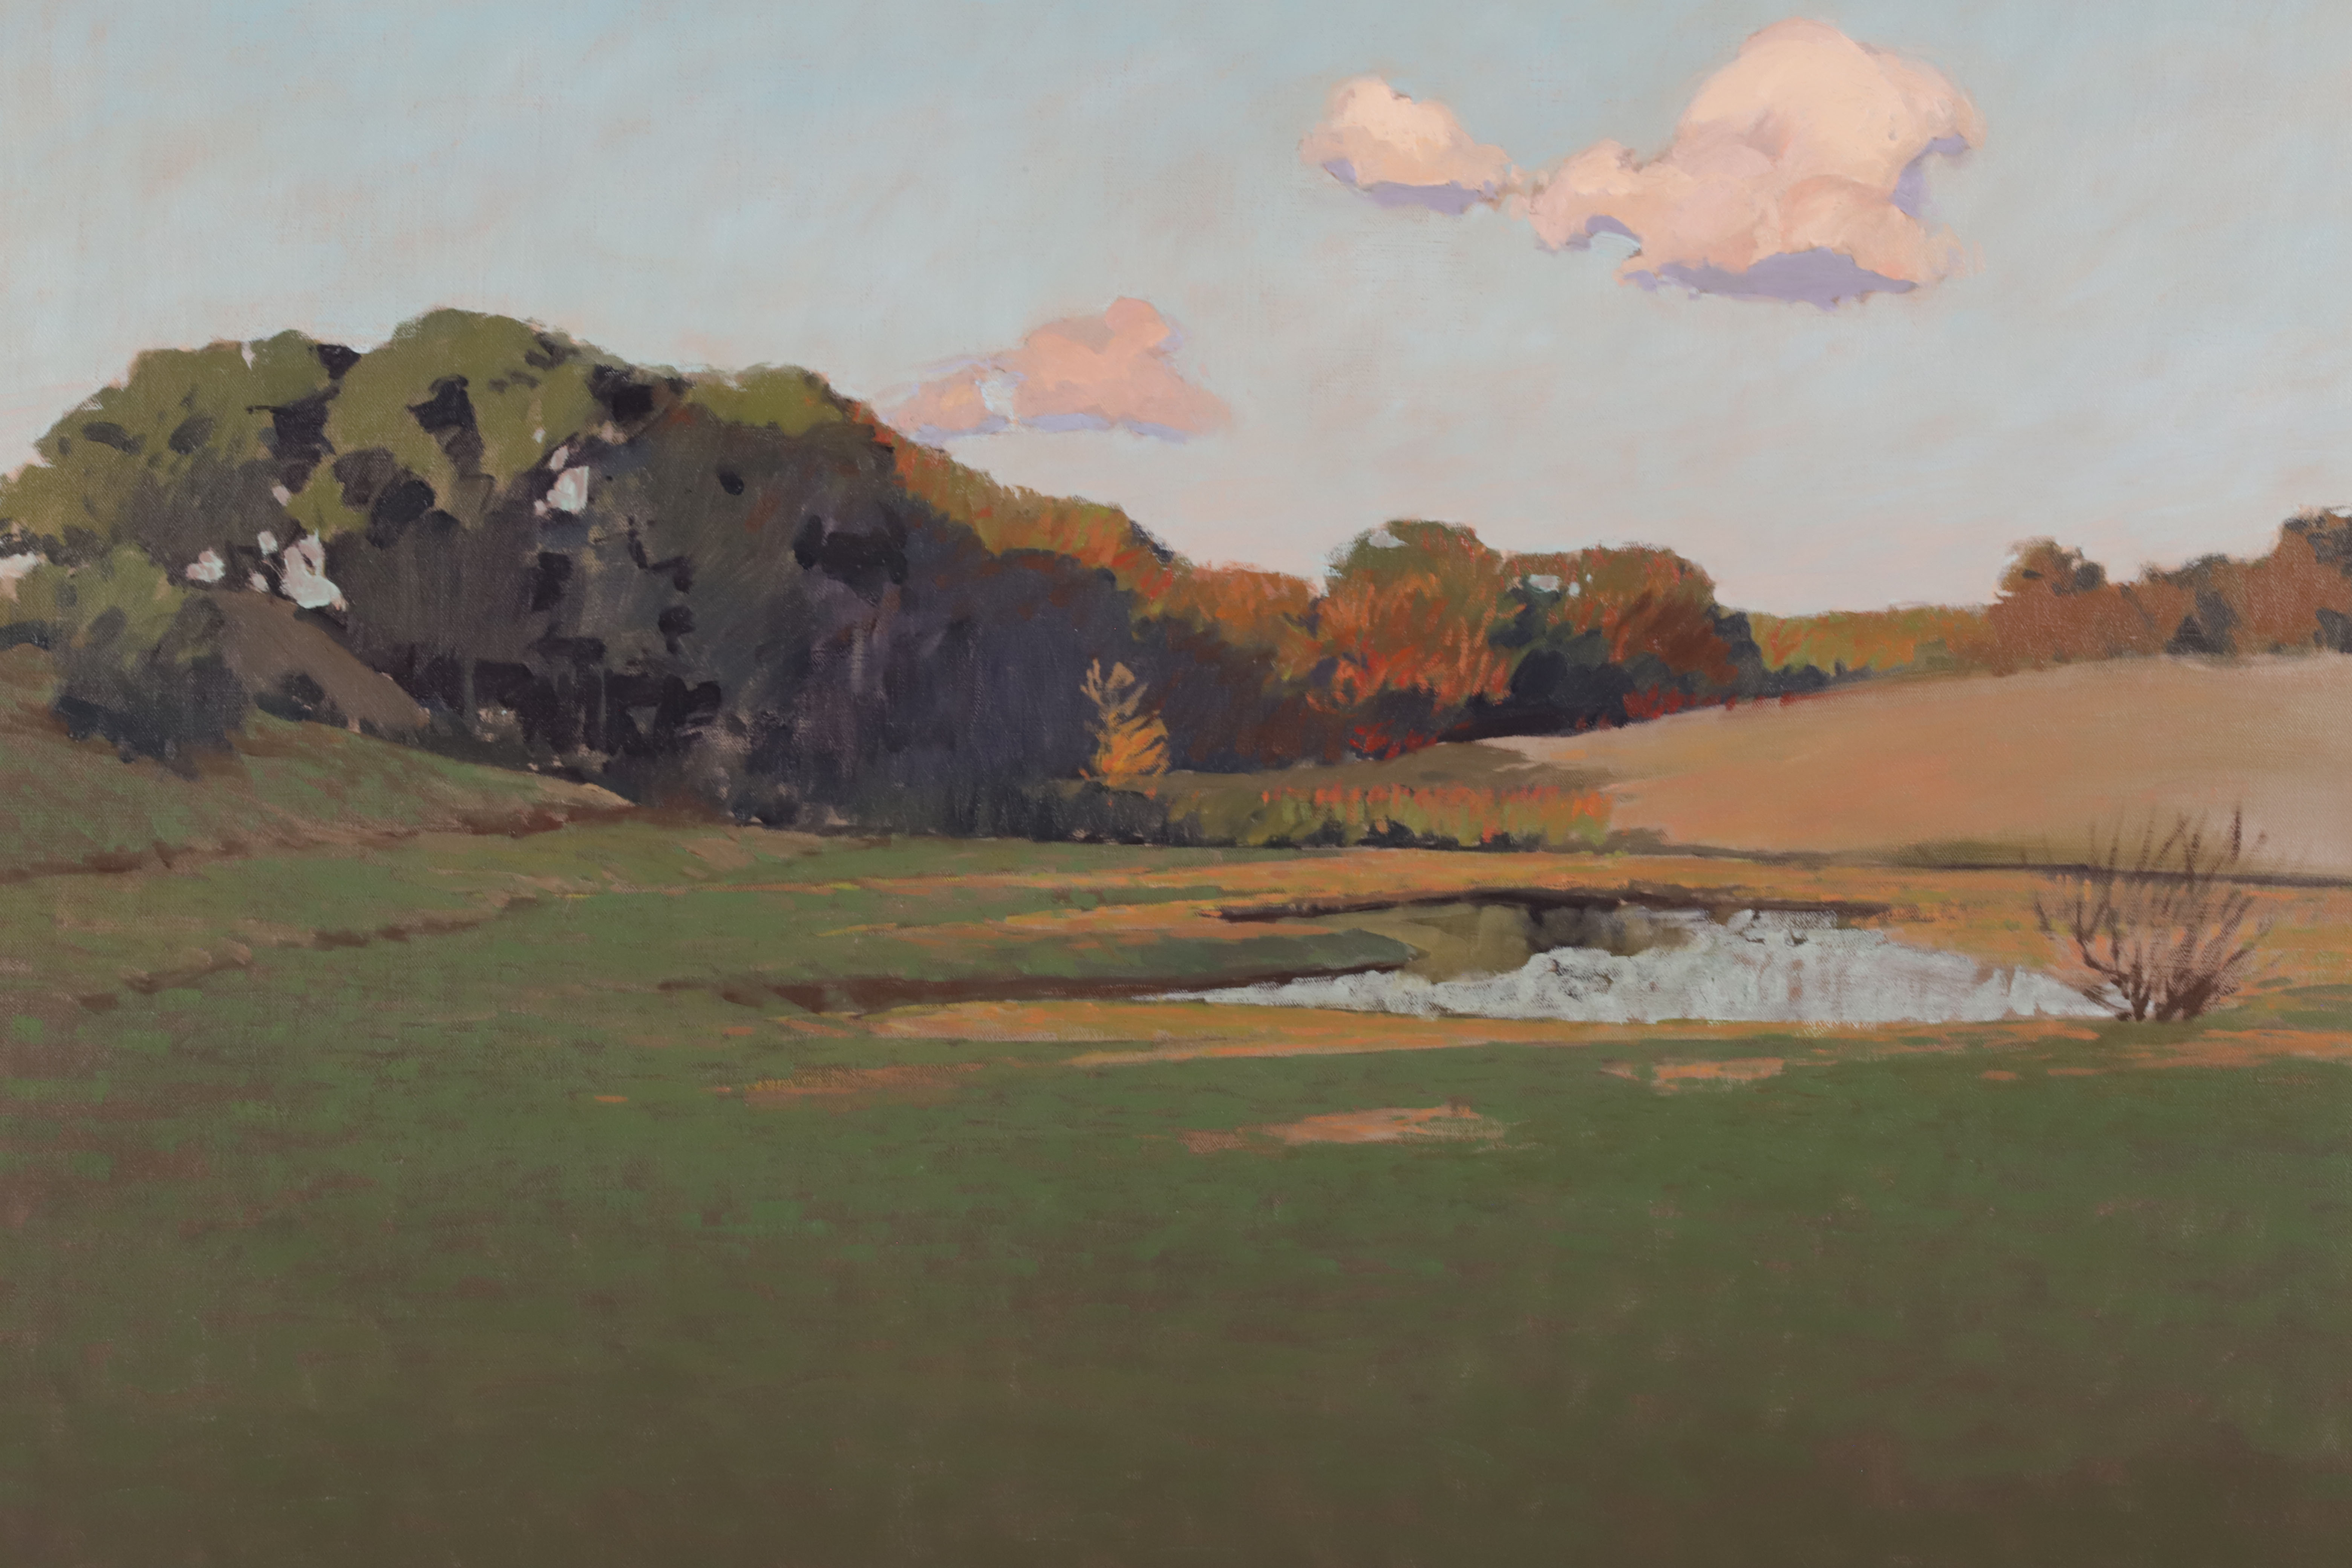 David Bareford Oil on Canvas “Small Pond”